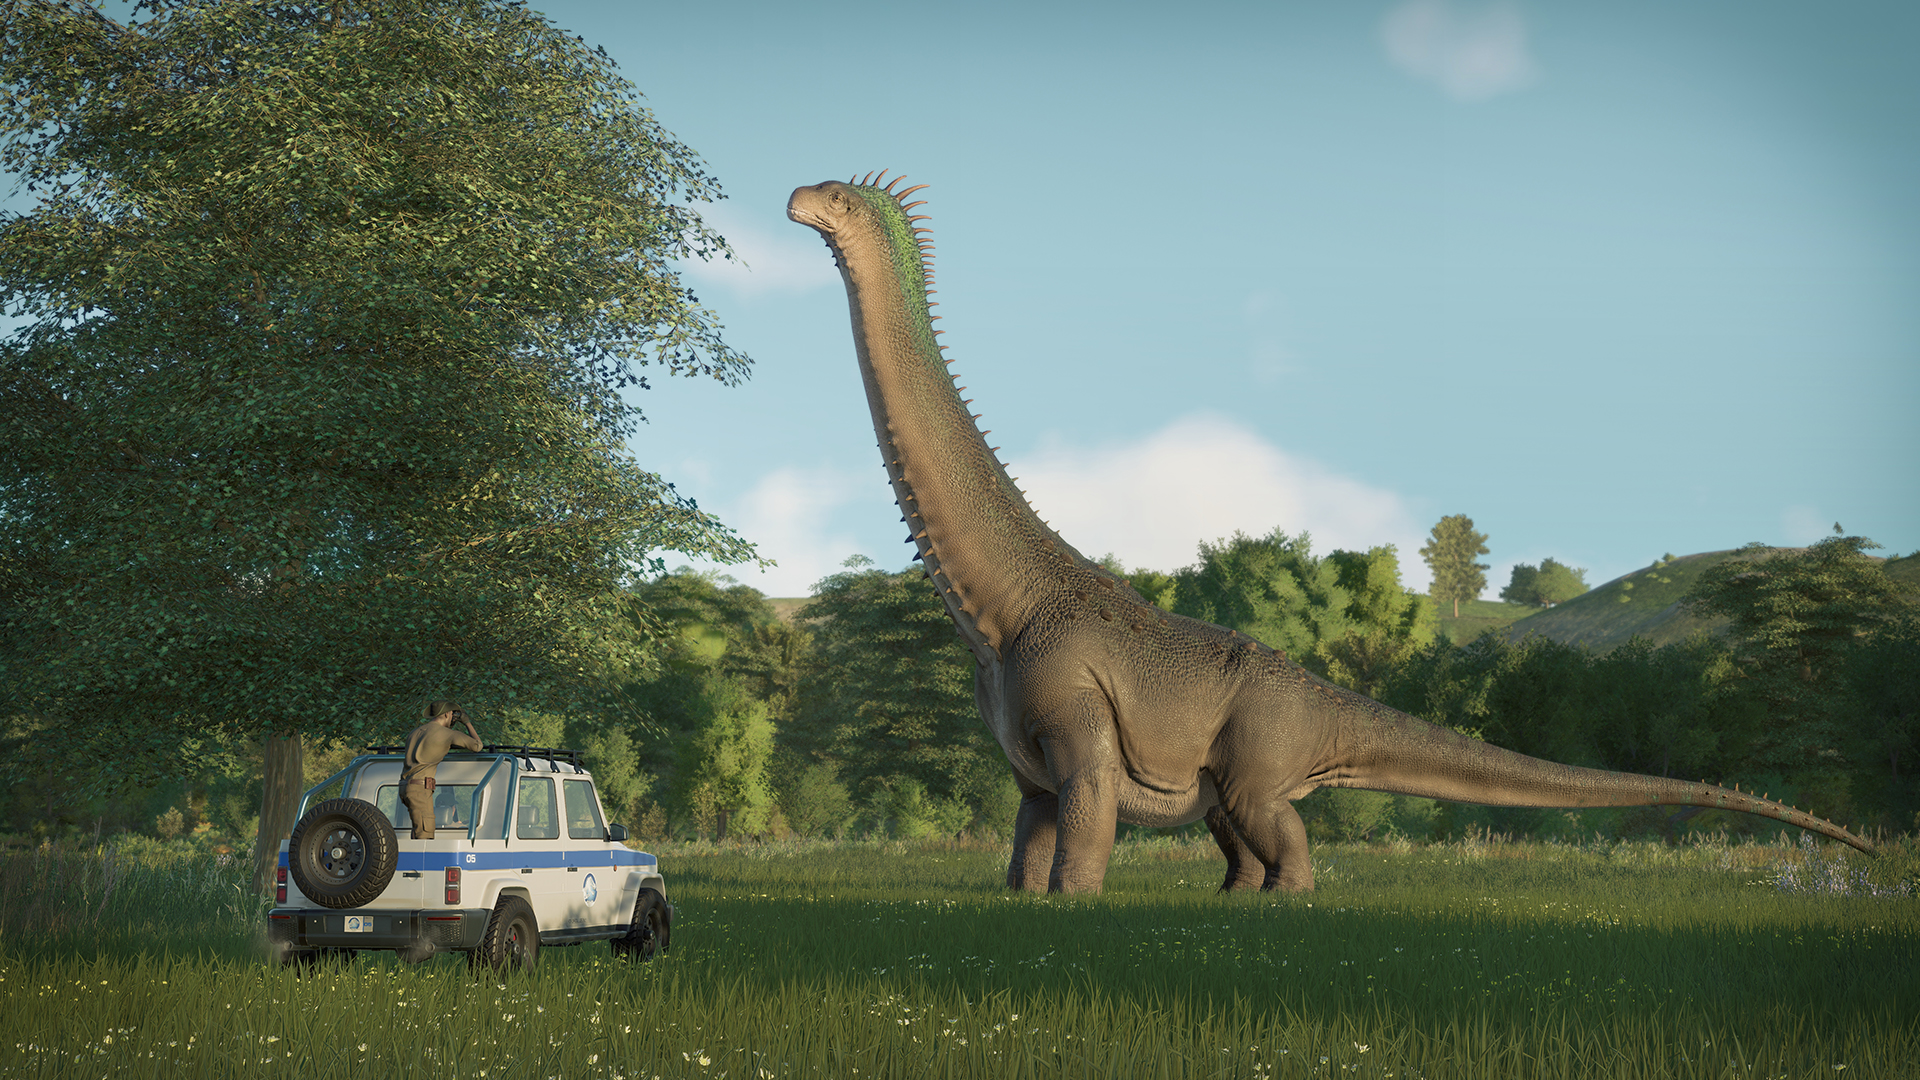 Jurassic World Evolution 3 announced, along with 2 more sim games from Frontier